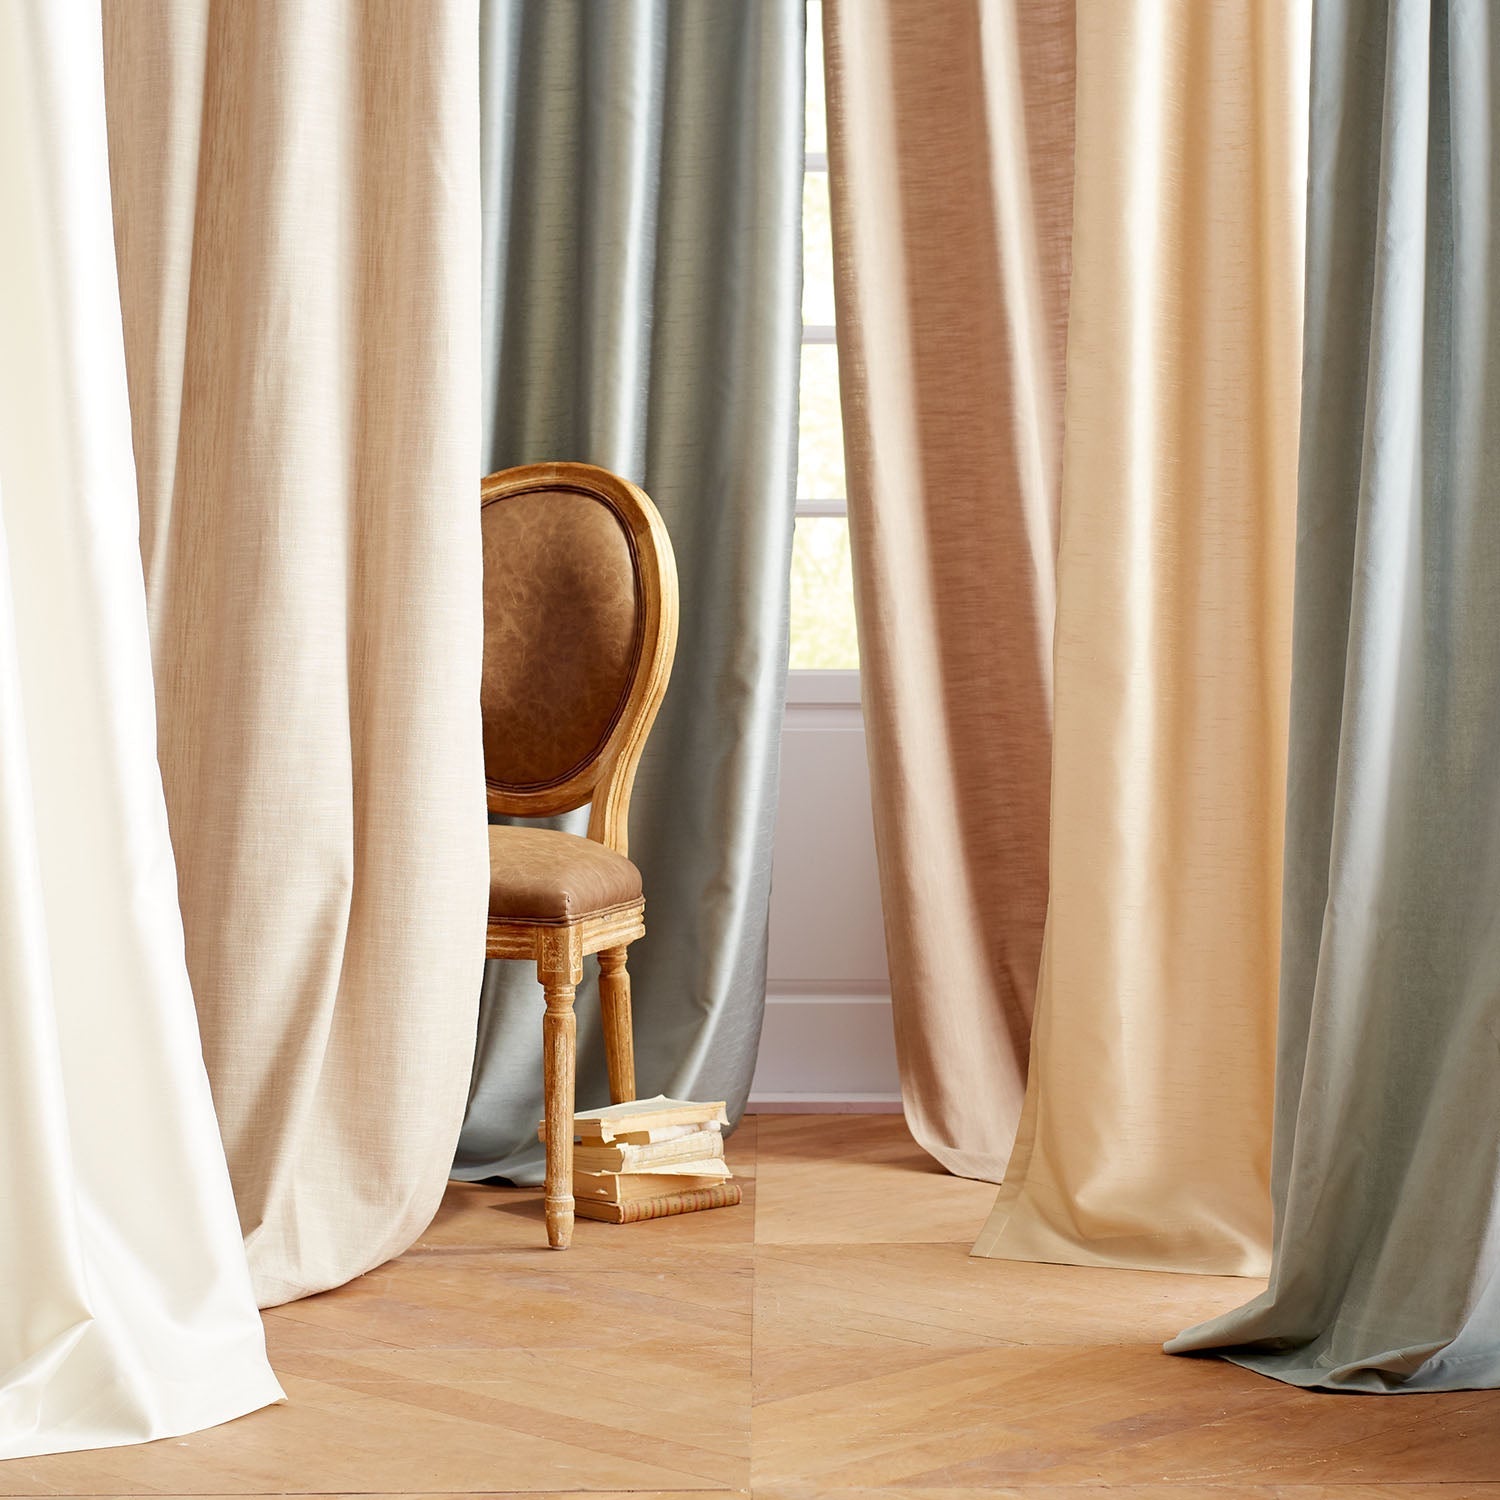 How to Hang Curtains: Easy Step-by-Step Guide | Pier 1 - Pier 1